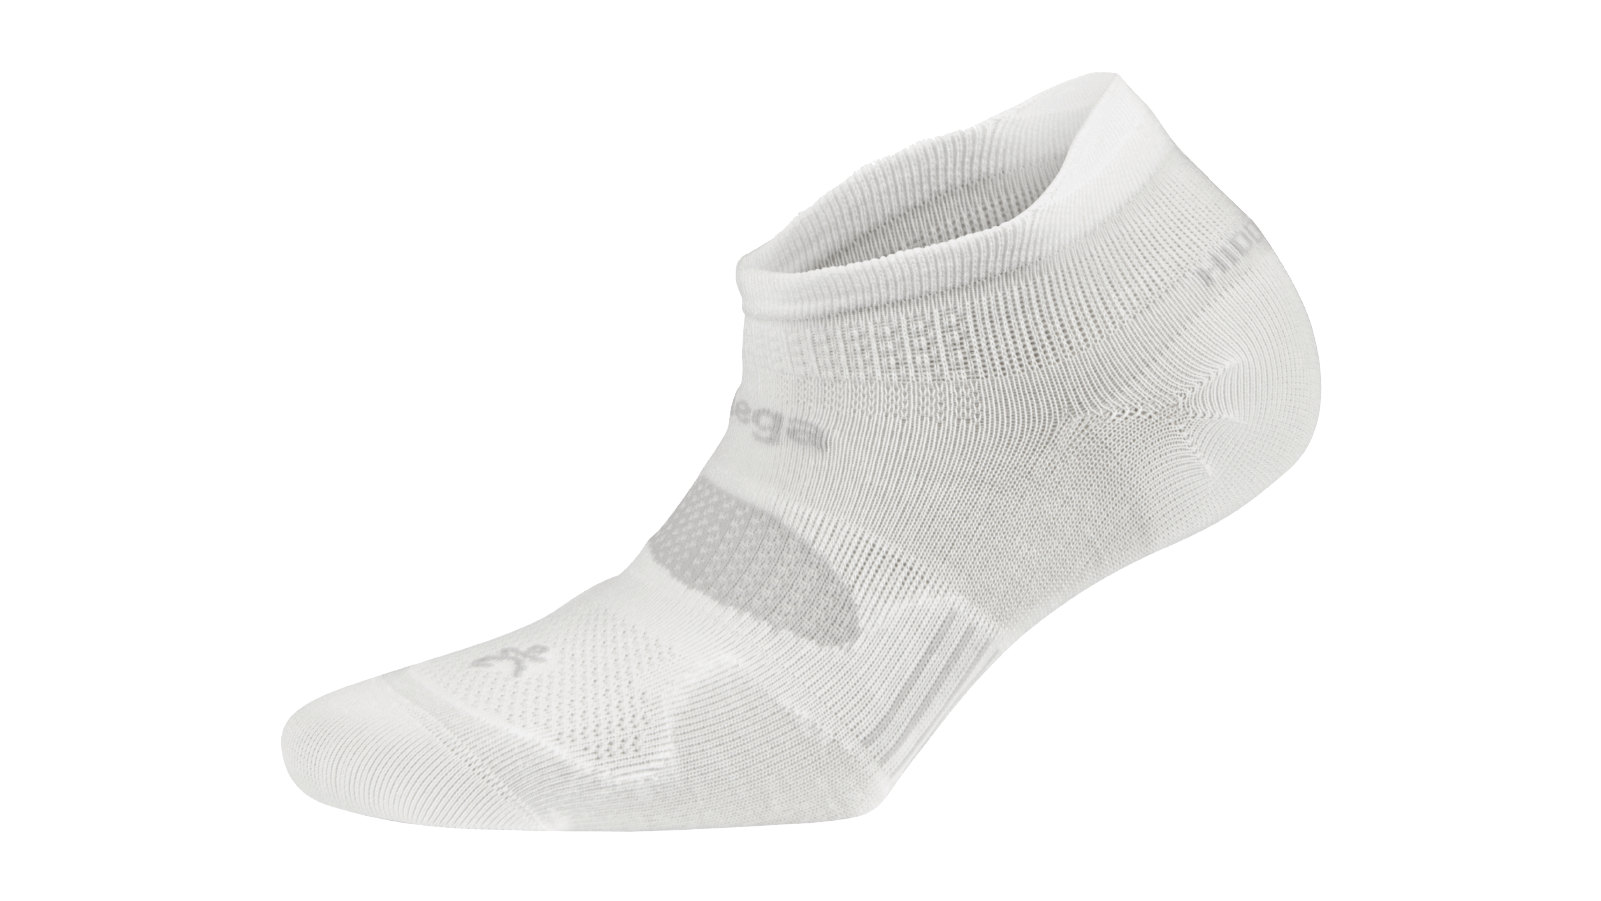 A lateral view of the Balega Hidden Dry no show running sock in the color white.